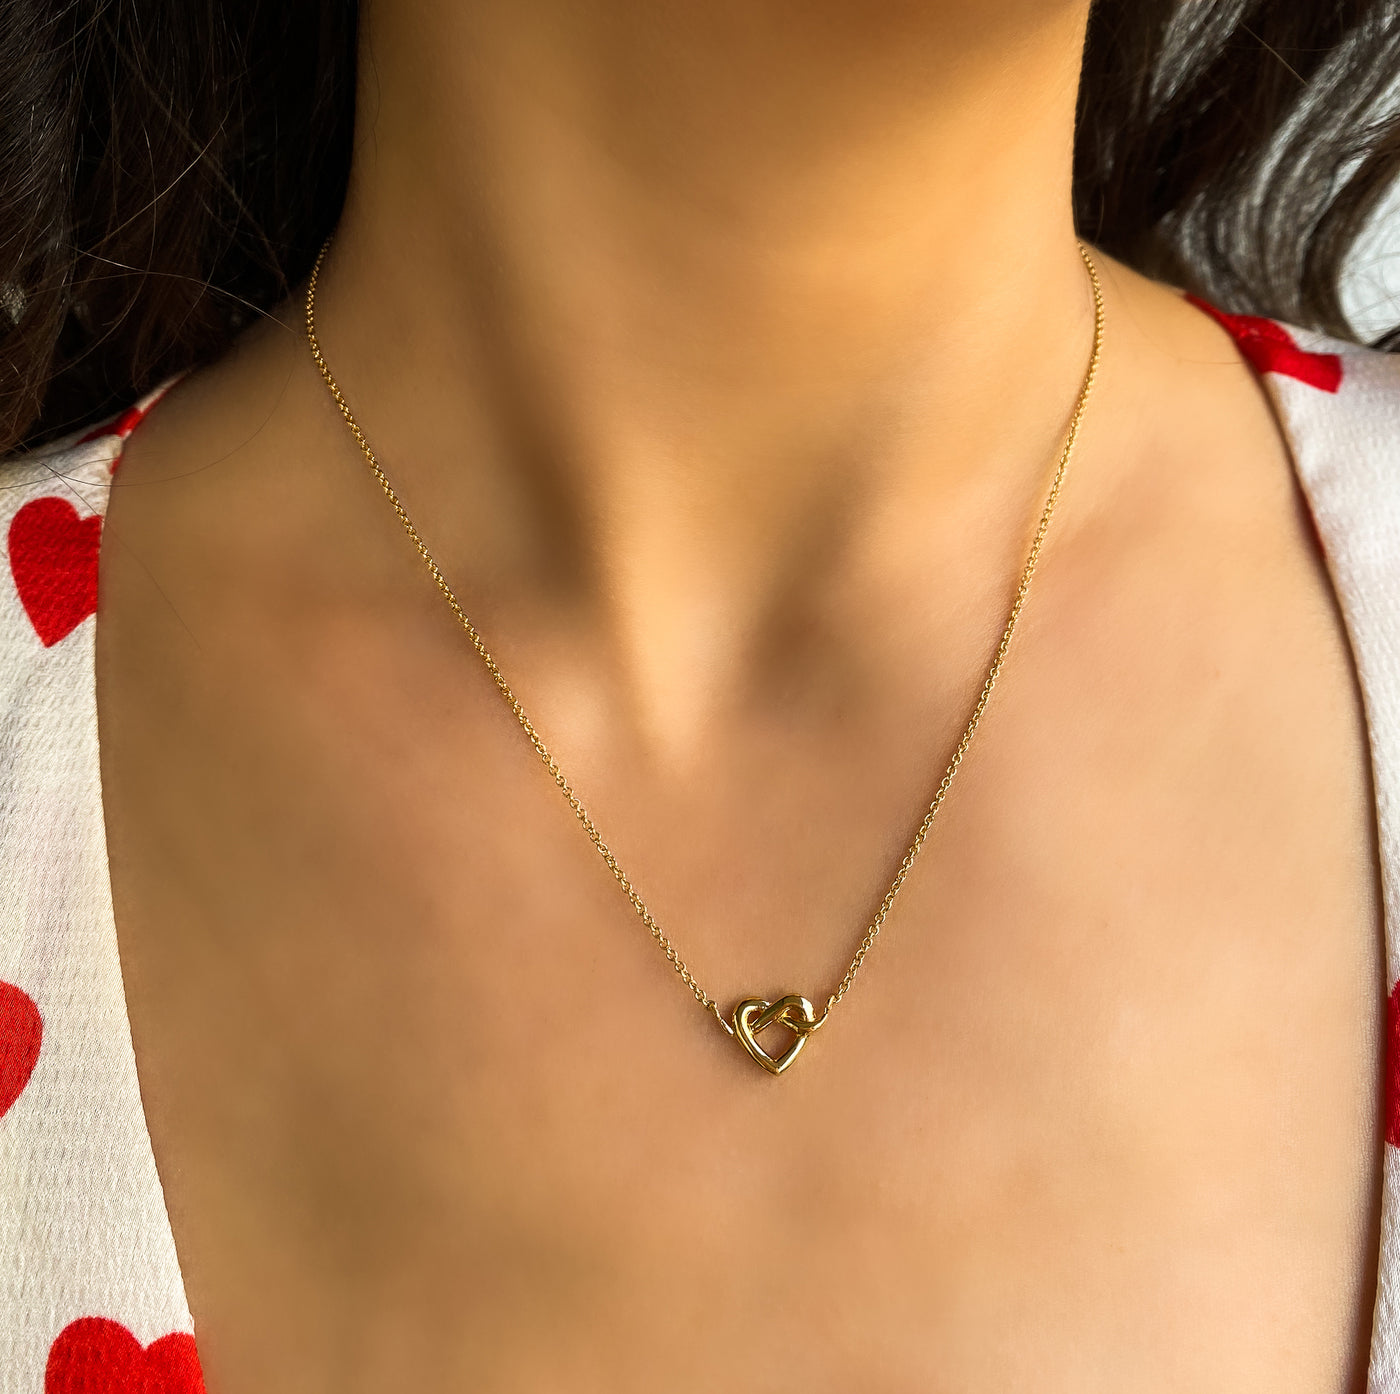 Model wearing Valentines love heart necklace